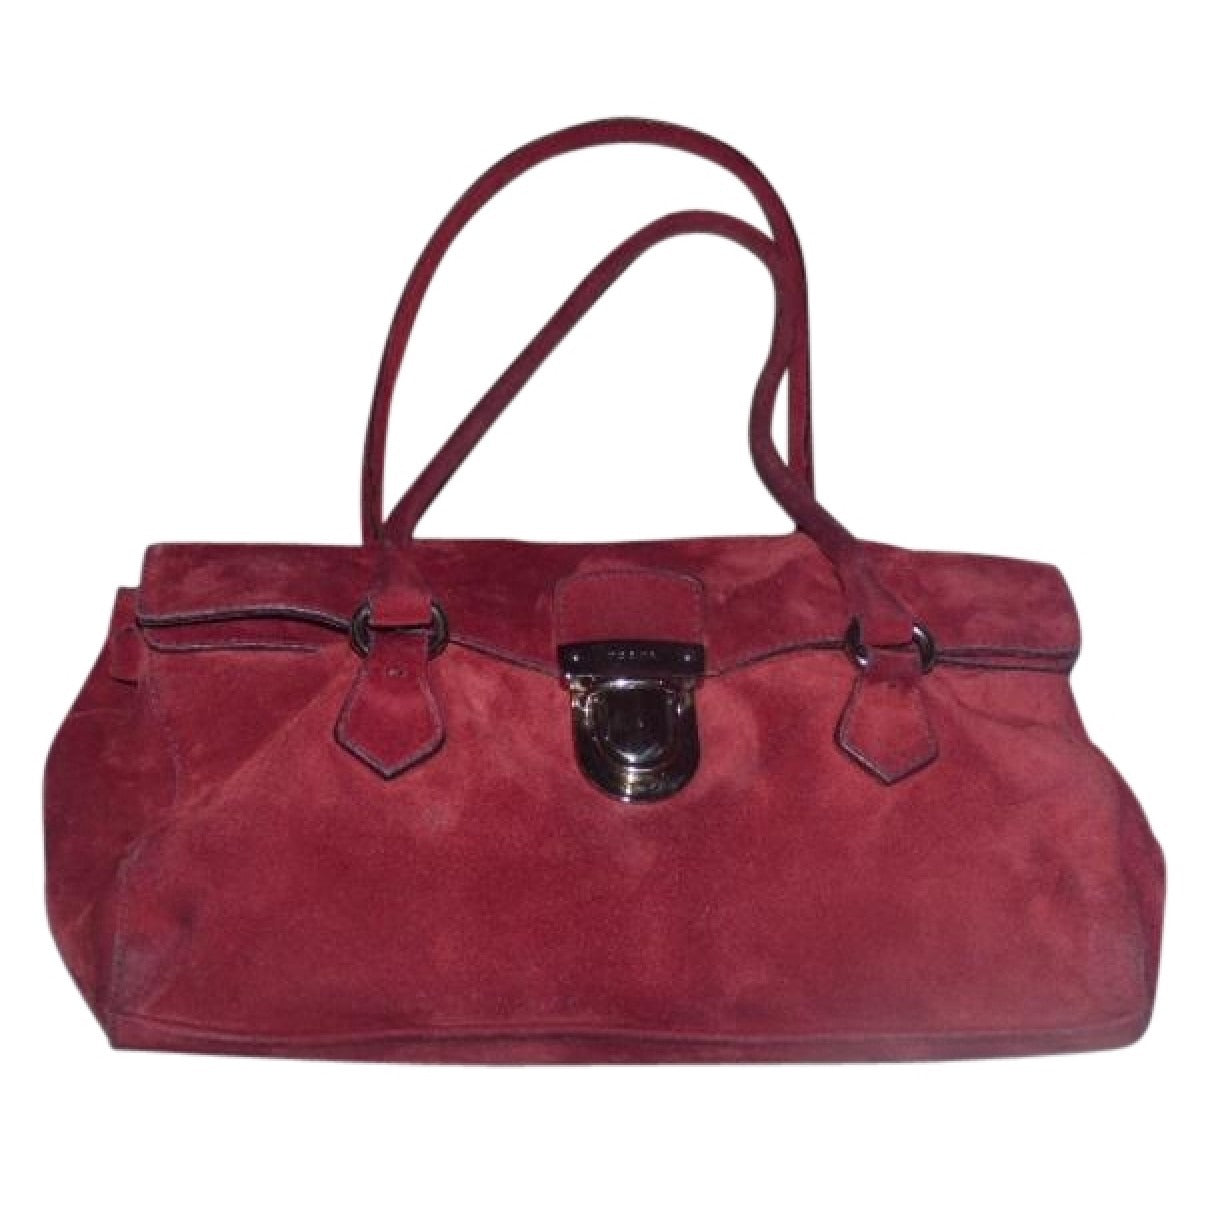 Red suede Sybille Prada "East to West" satchel